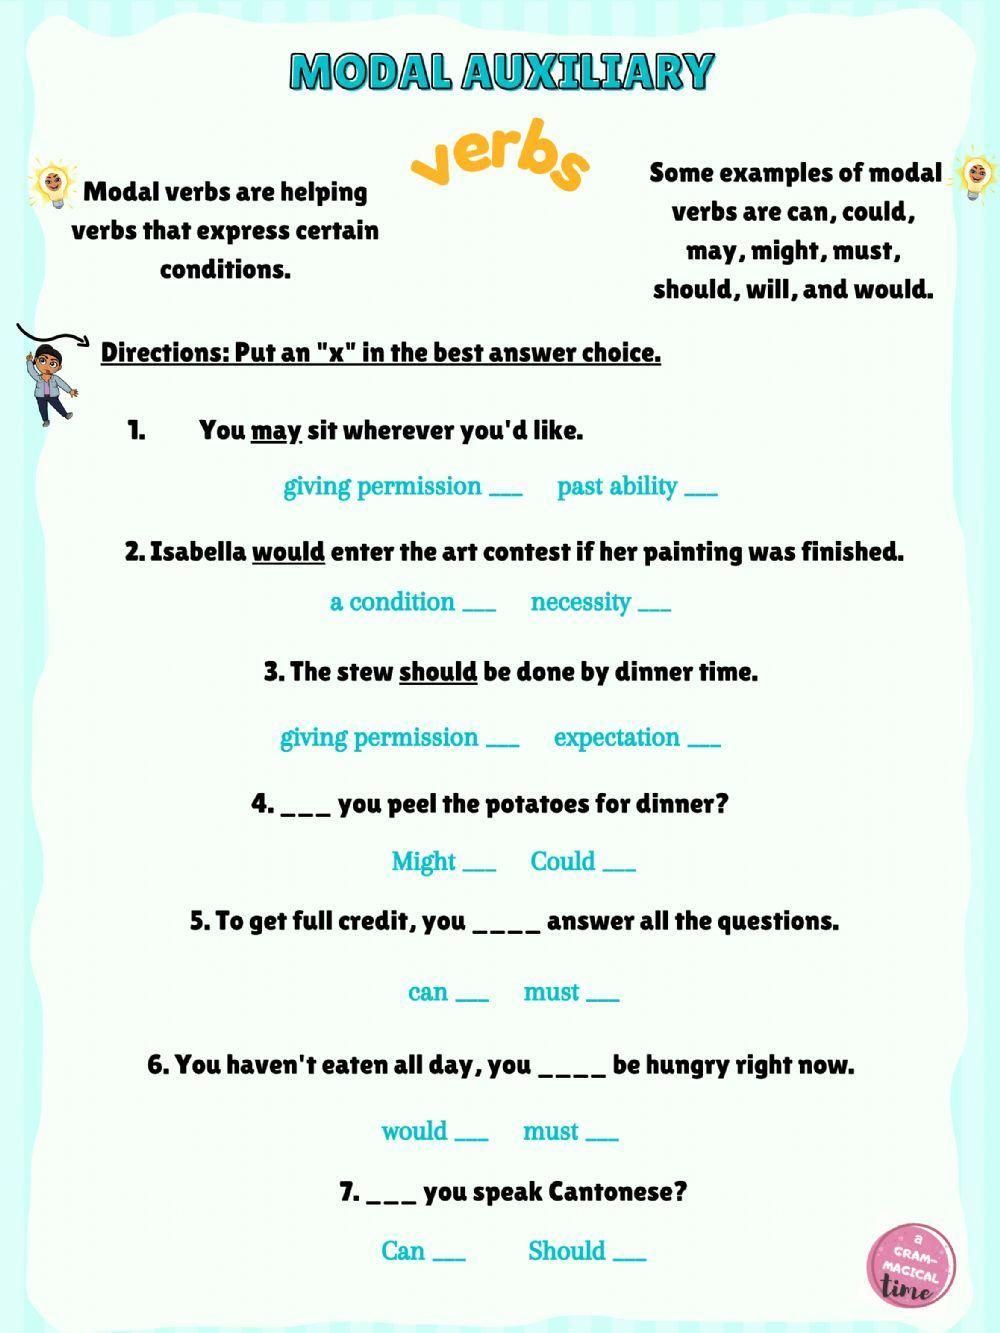 Modal Auxiliary Verbs - by Grammagical Time